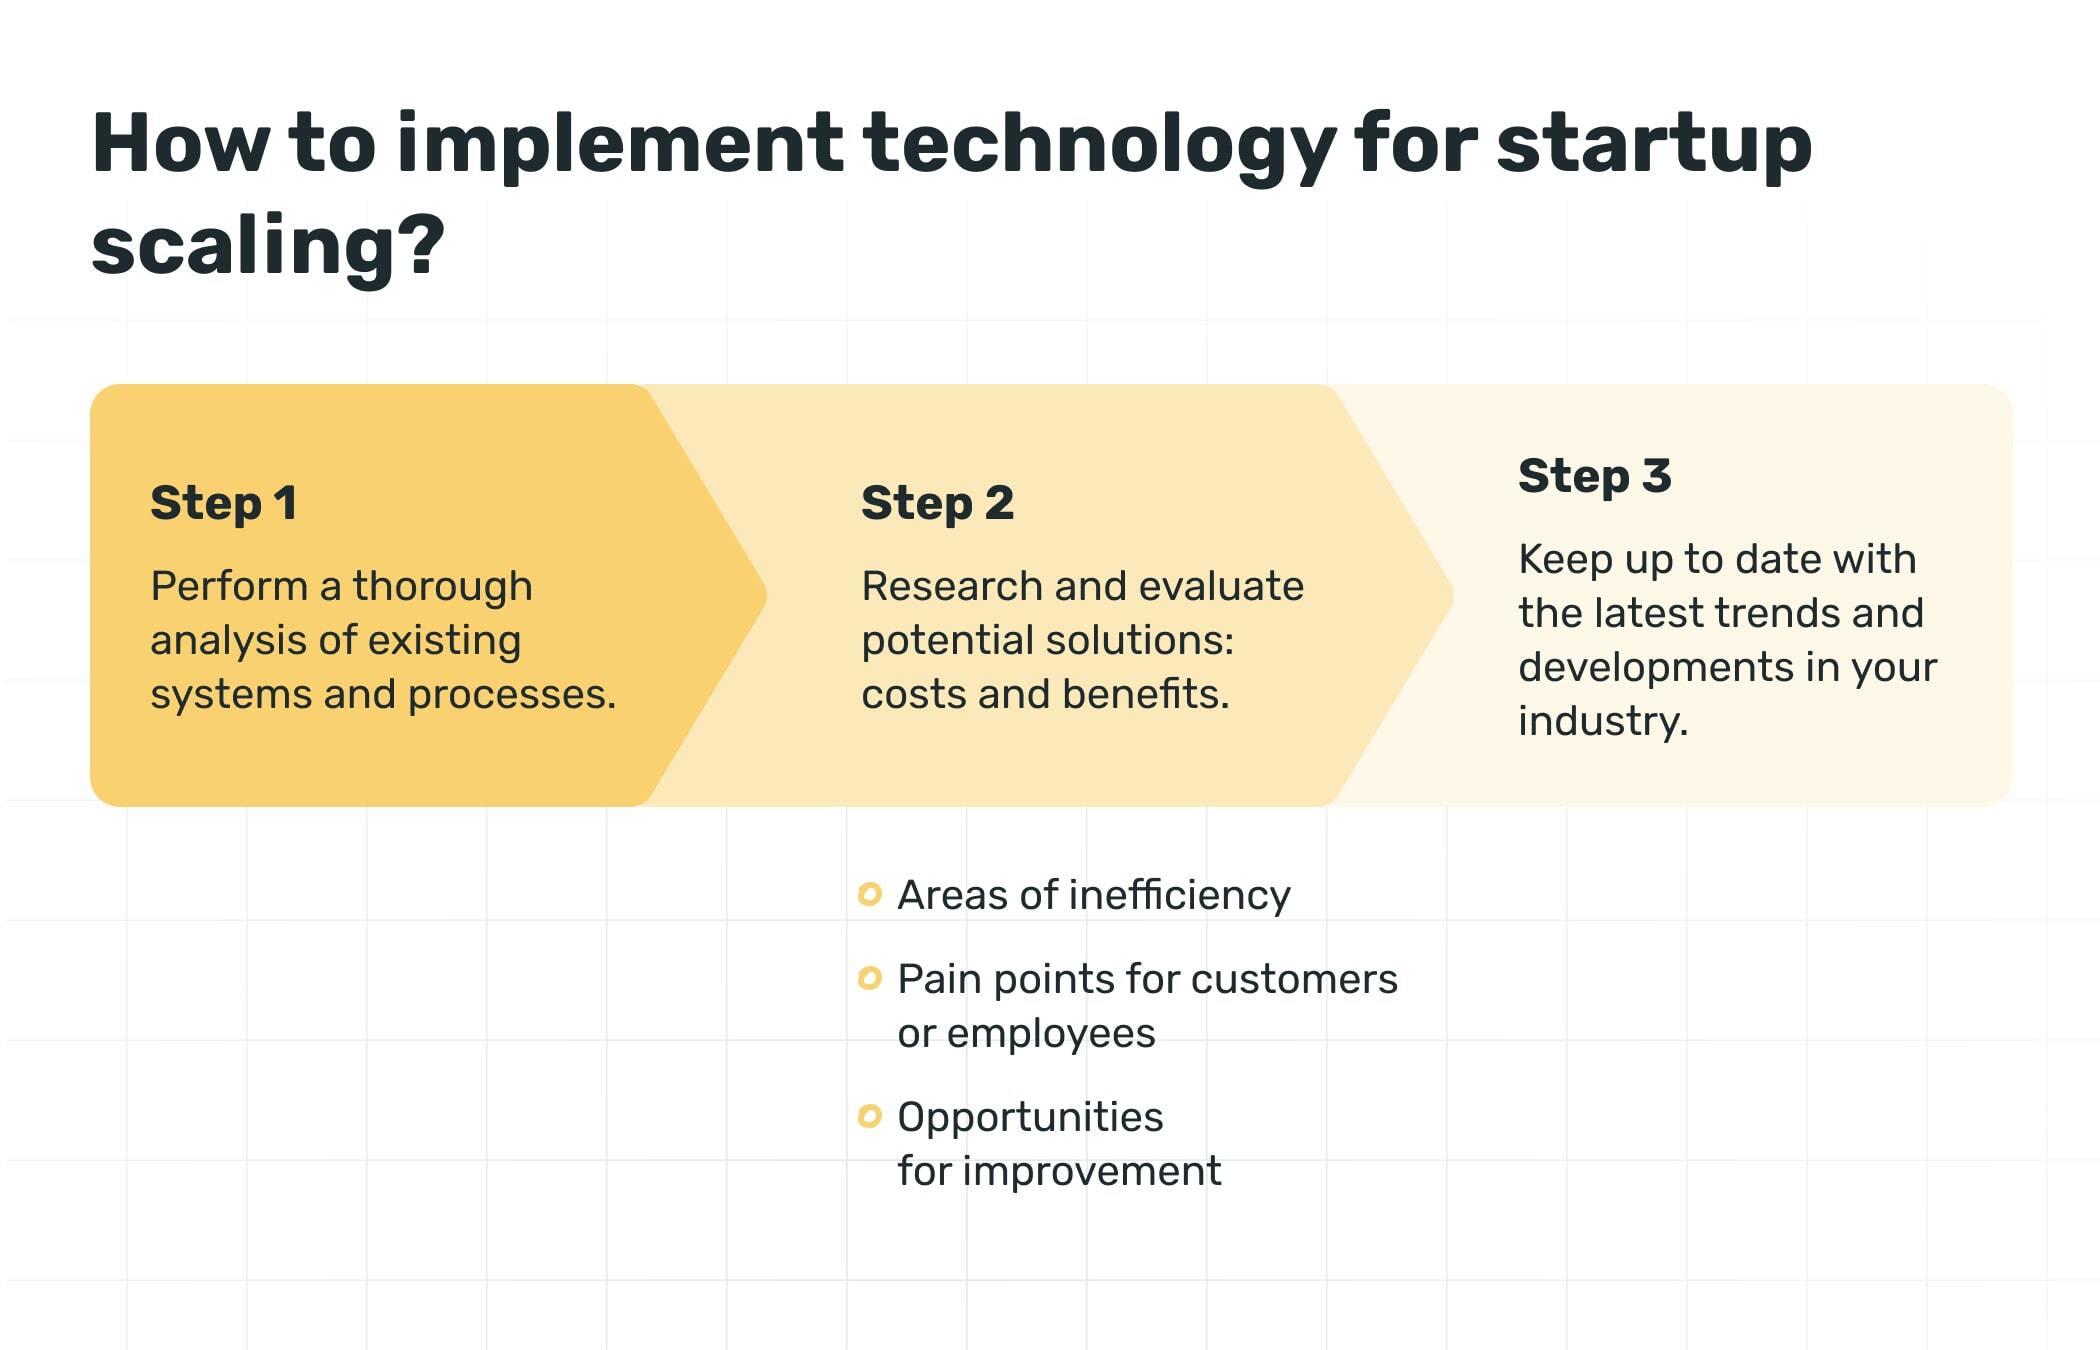 How to scale a startup implementing technology